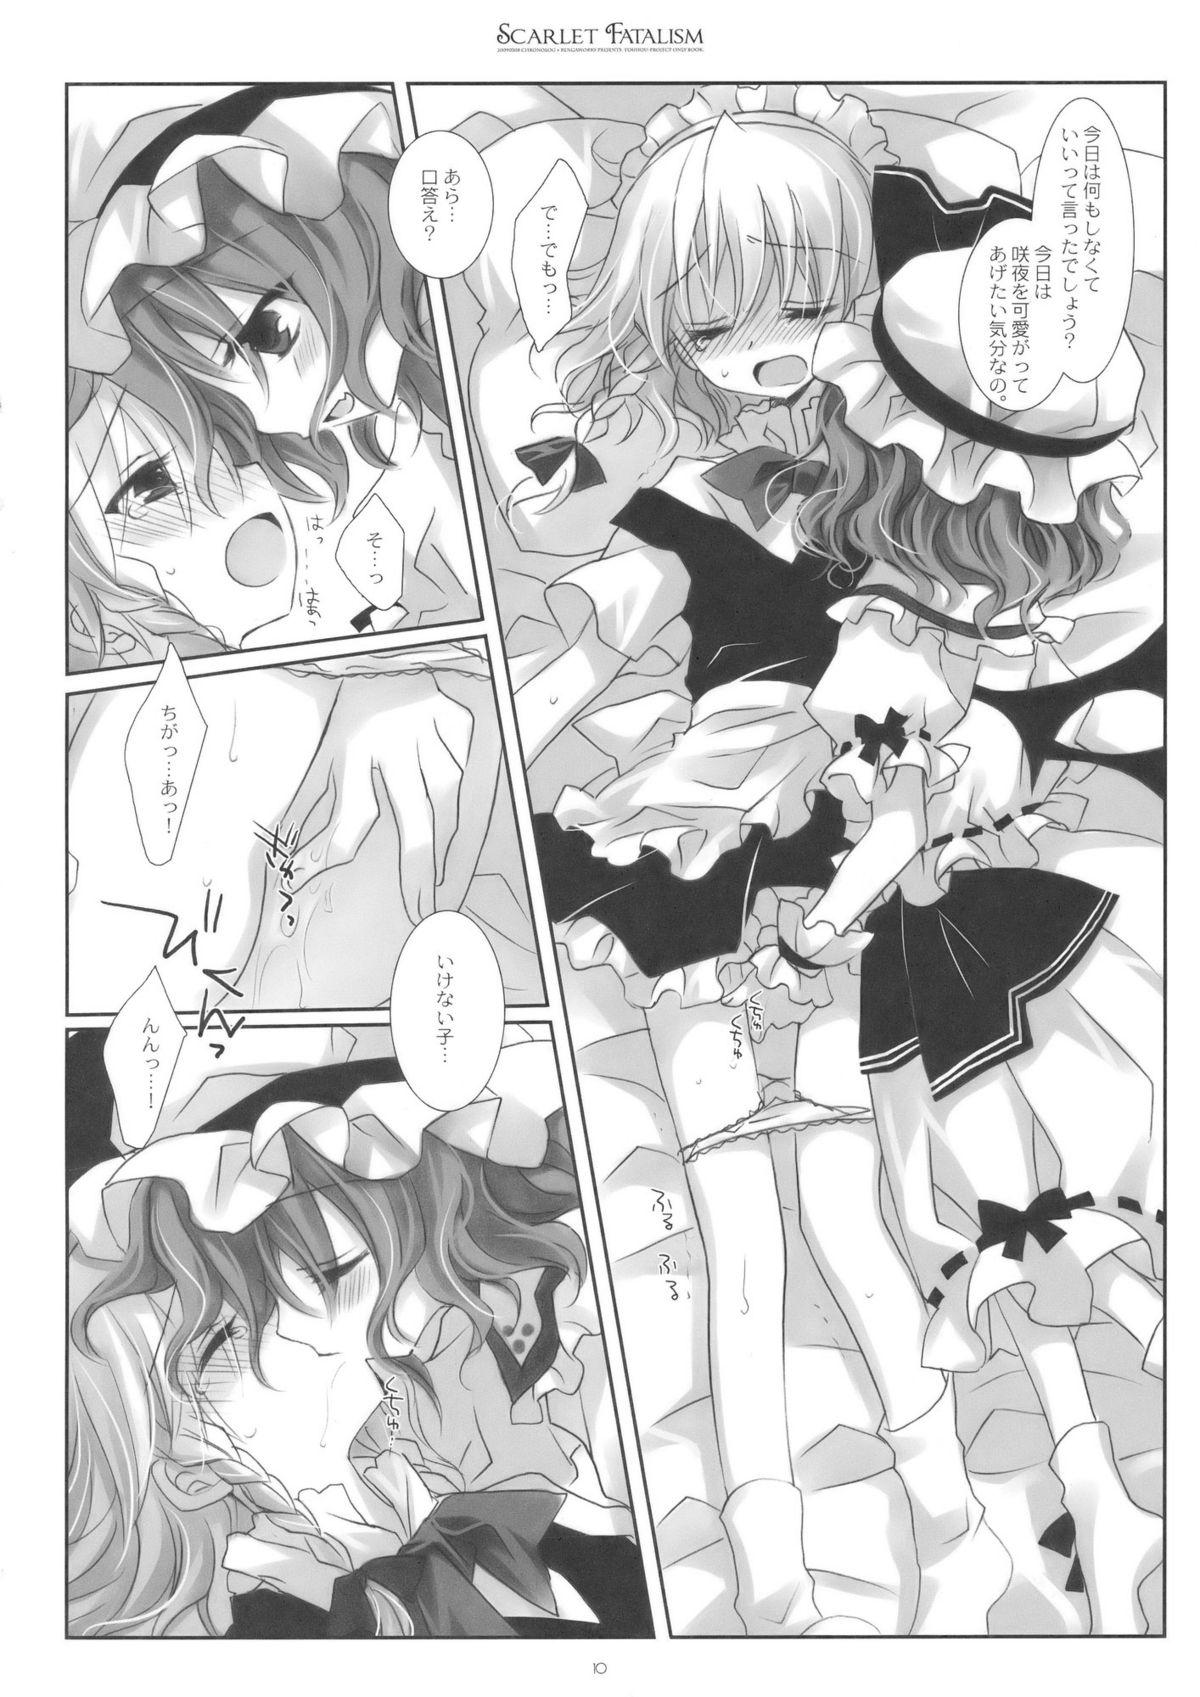 3some Scarlet Fatalism - Touhou project Gay Fucking - Page 10